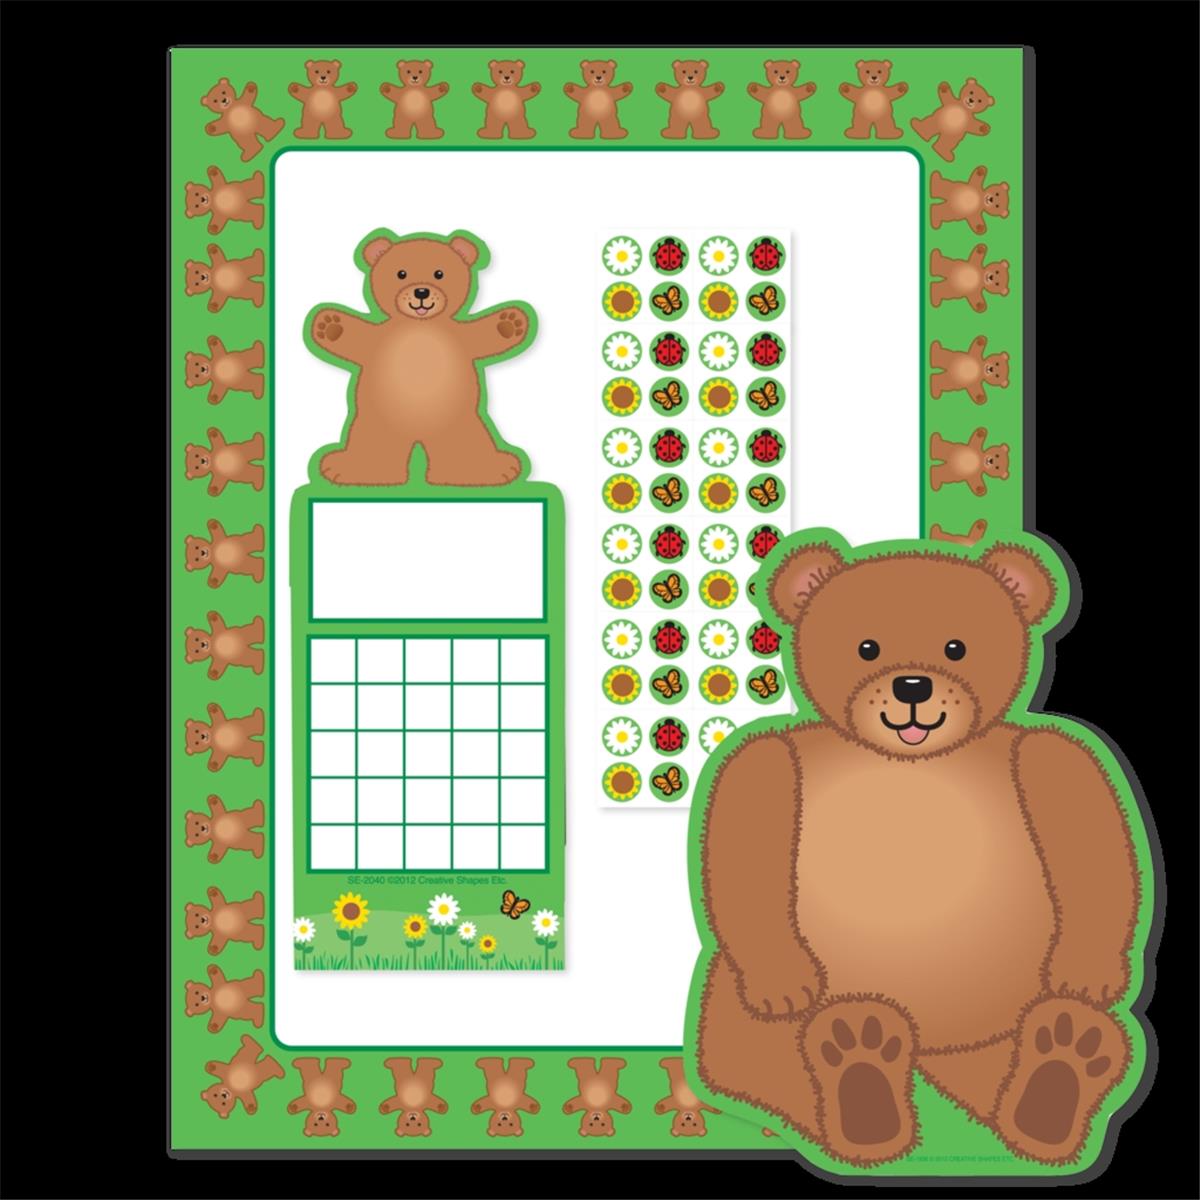 Picture of Creative Shapes Etc SE-7116 11 x 8.5 in. Stationery Set - Teddy Bear